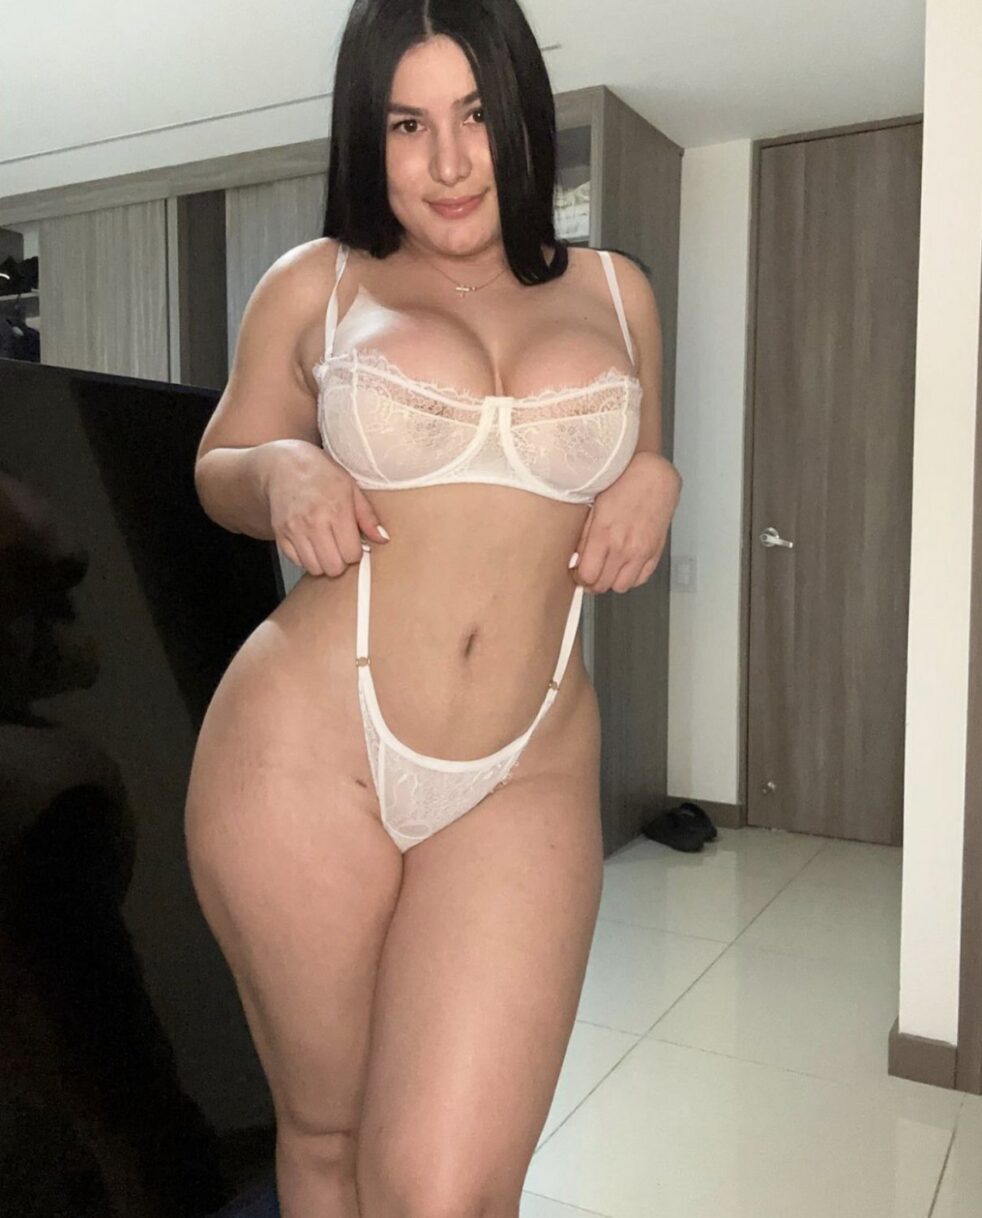 Andrea alaya 1500 onlyfans